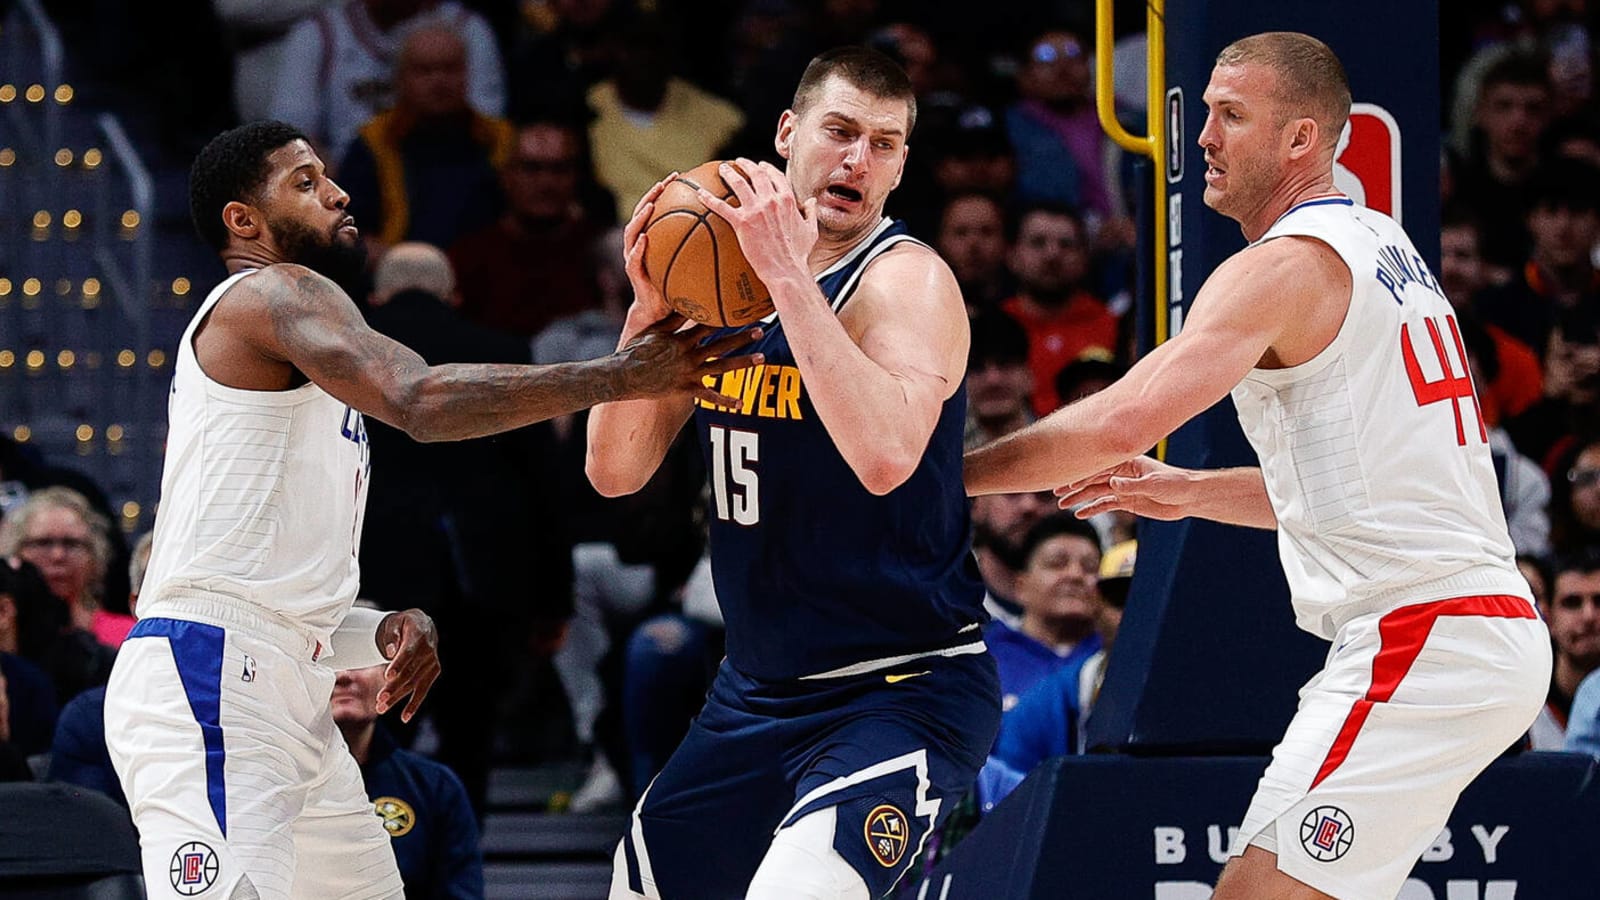 Photo of Jokic prompts speculation of how defenders treat him